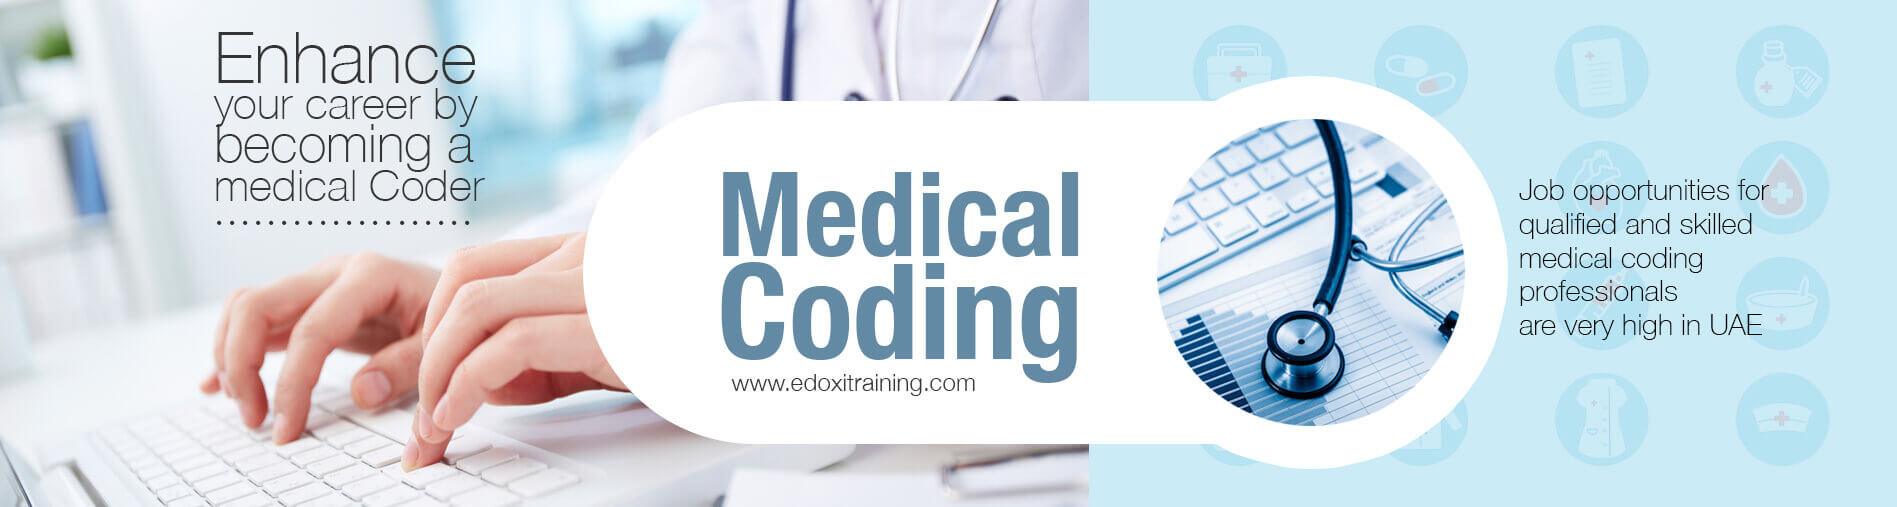 Medical Coding preparation class-Webinars and get insightful advice, tips, and strategies from the experts in Dubai, Dubai, United Arab Emirates